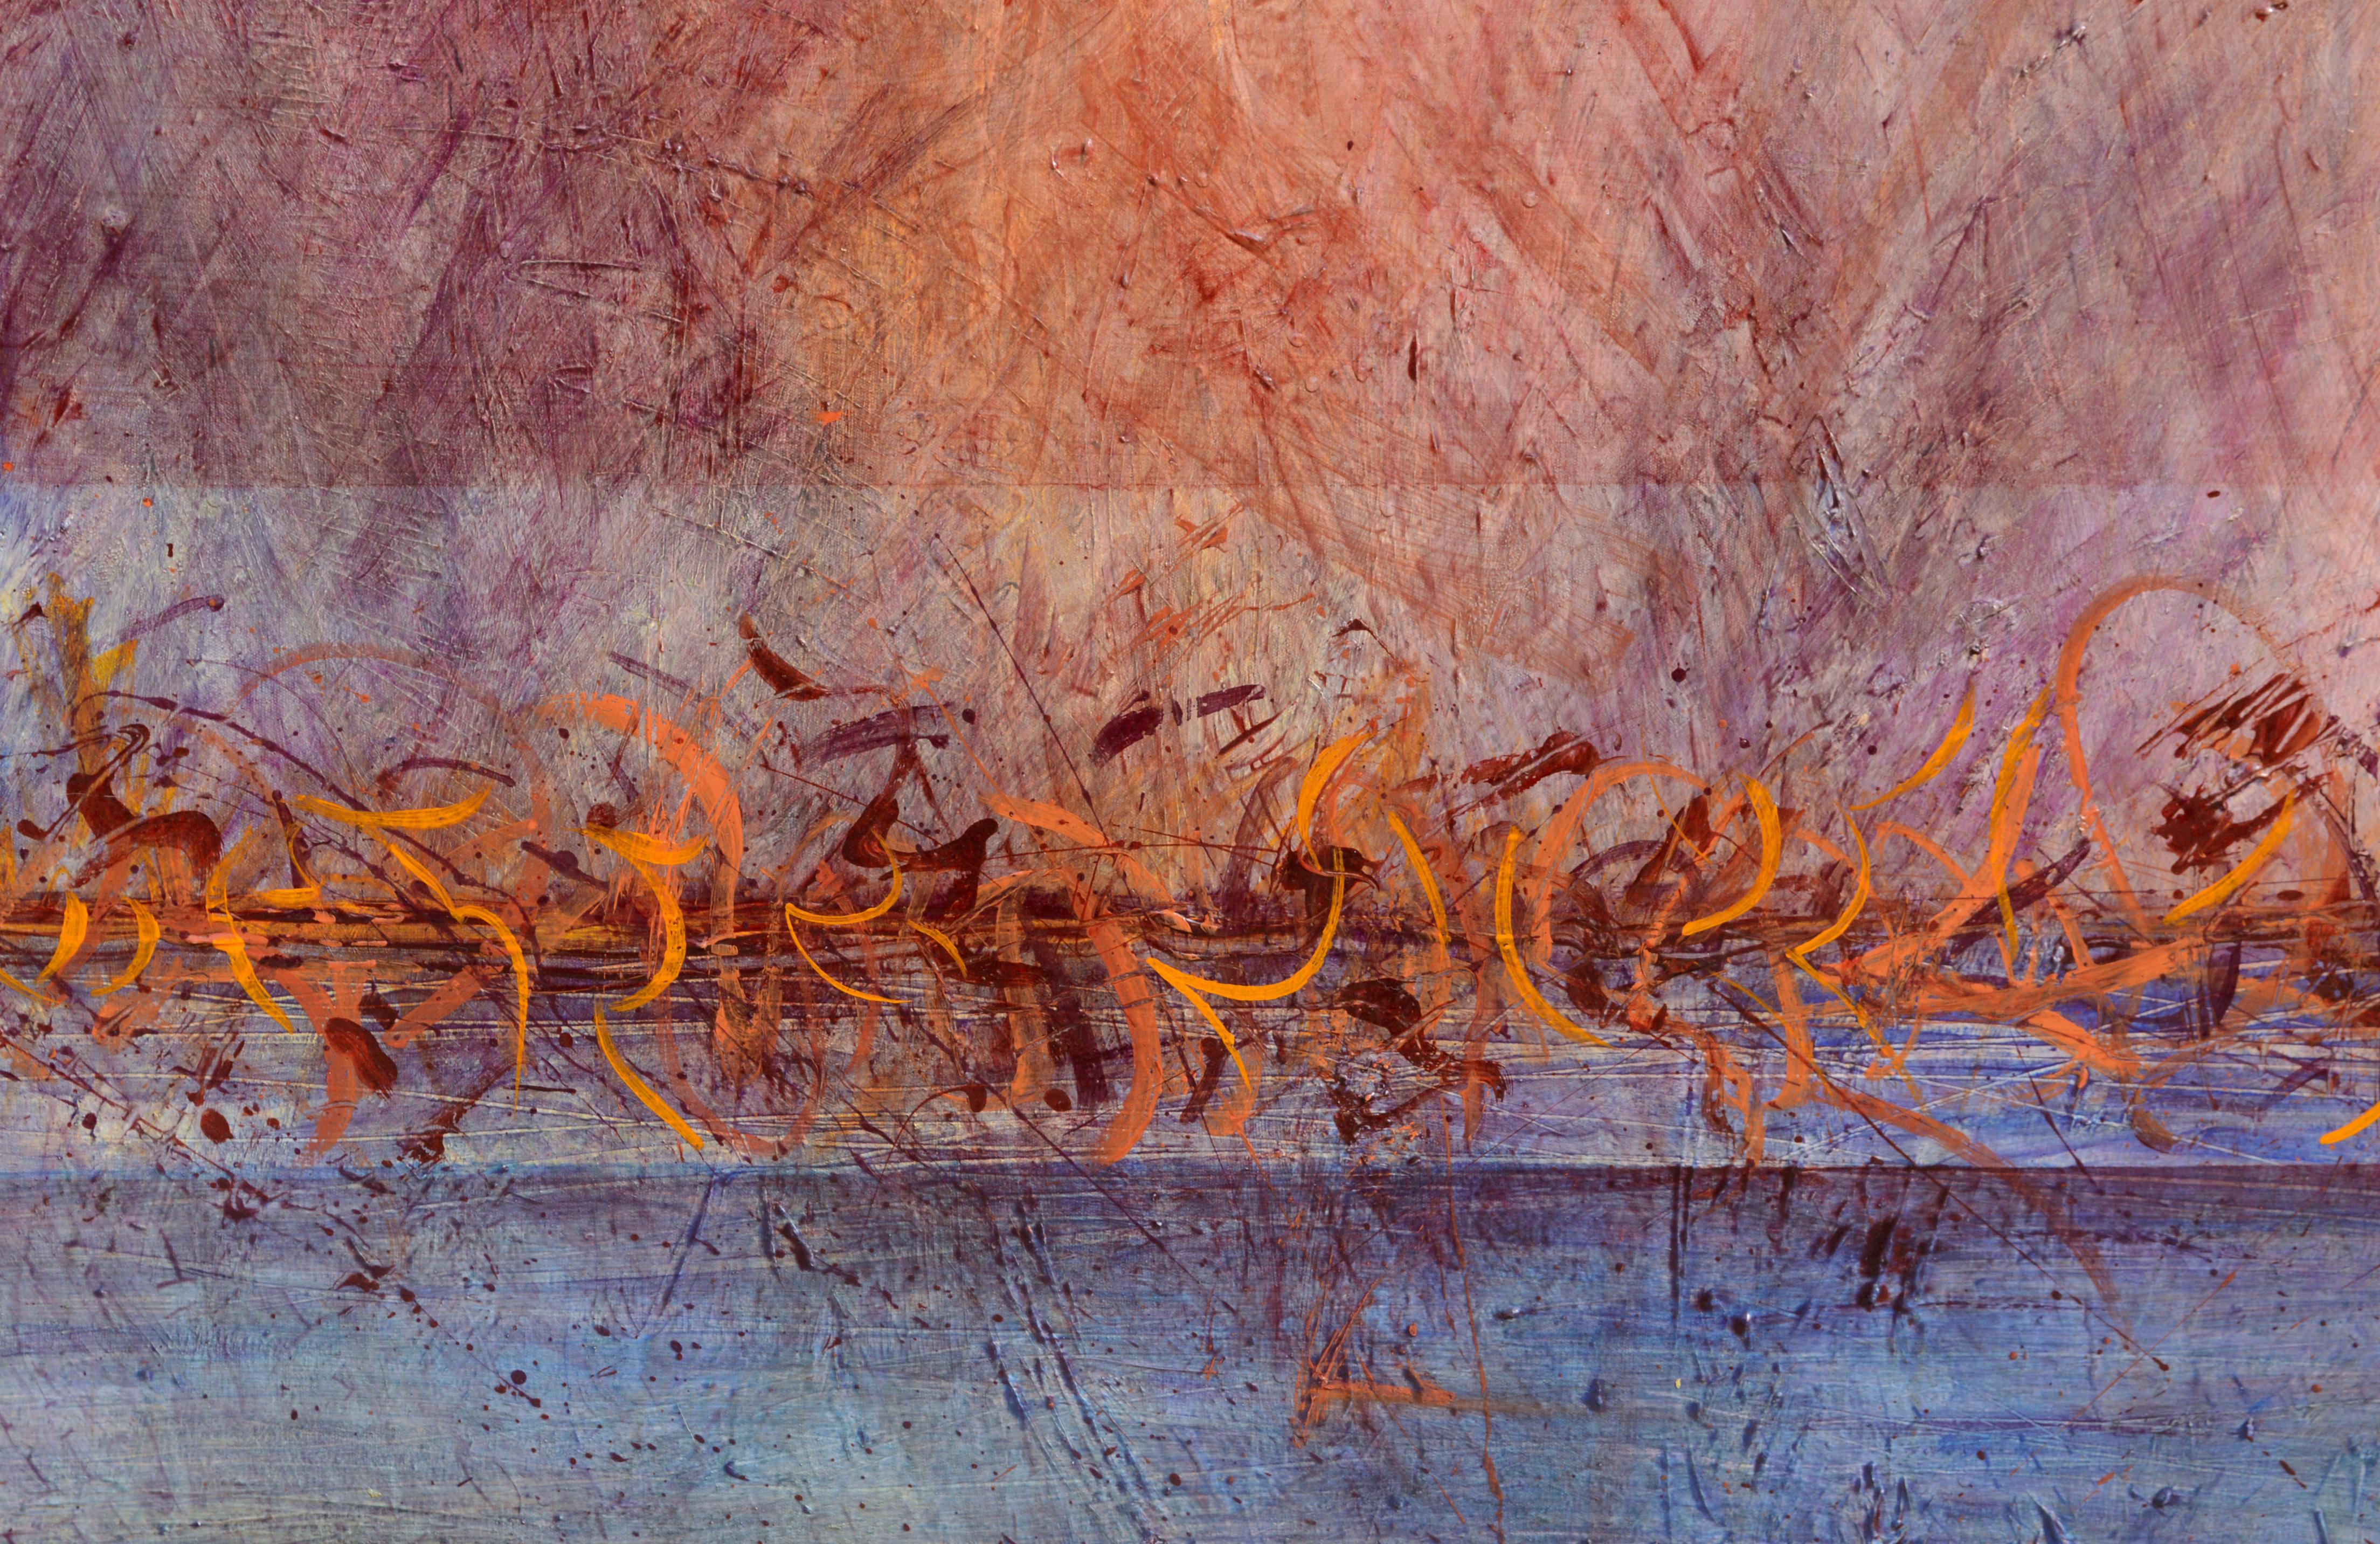 Abstract Fire Birds on the Water - Brown Figurative Painting by M. Anderson